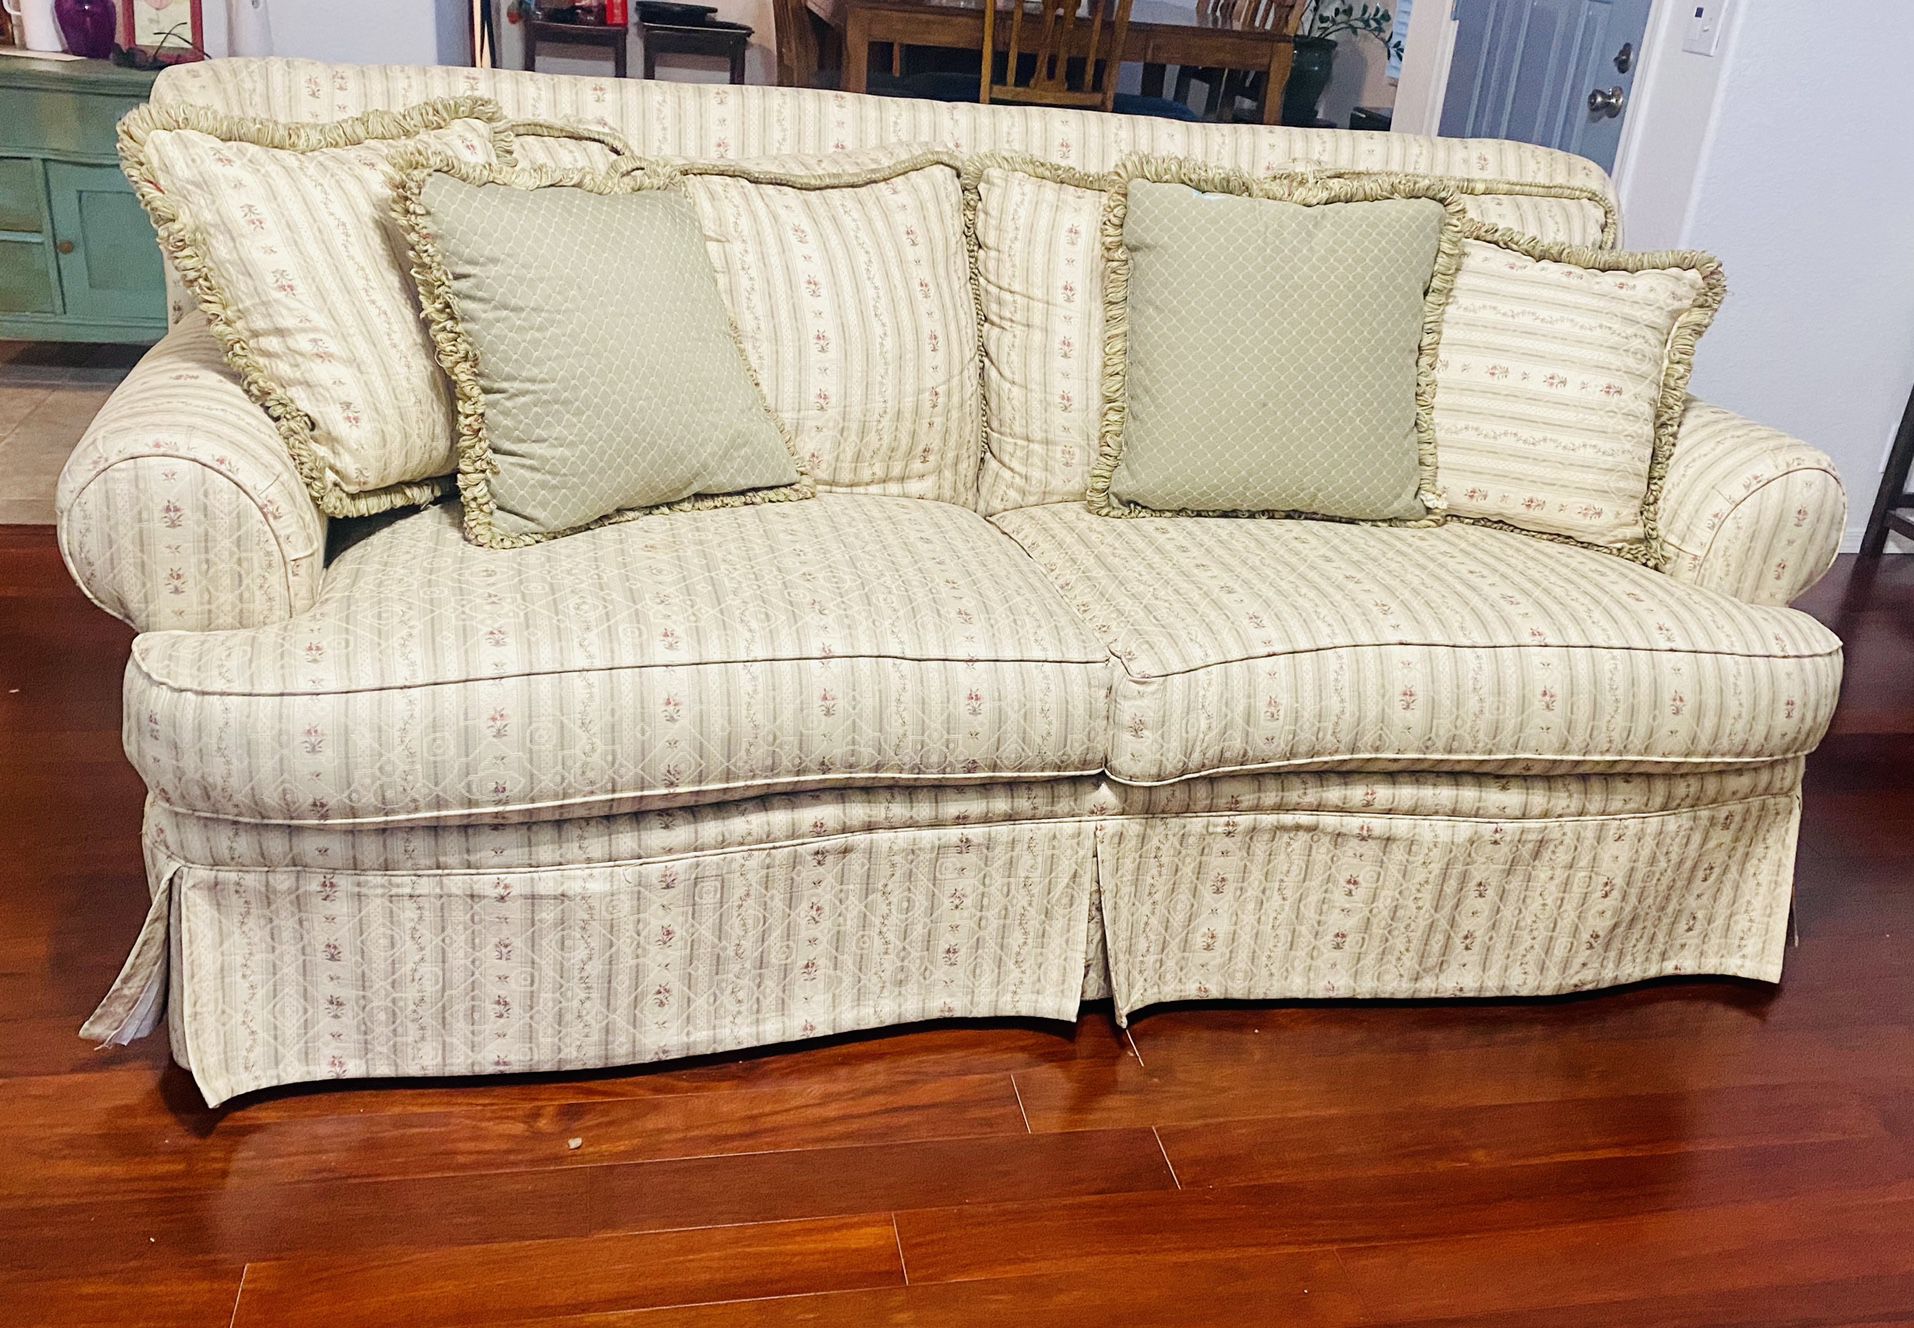 2 Clean Sofas For sale- Smoke Free Home With Pillows 